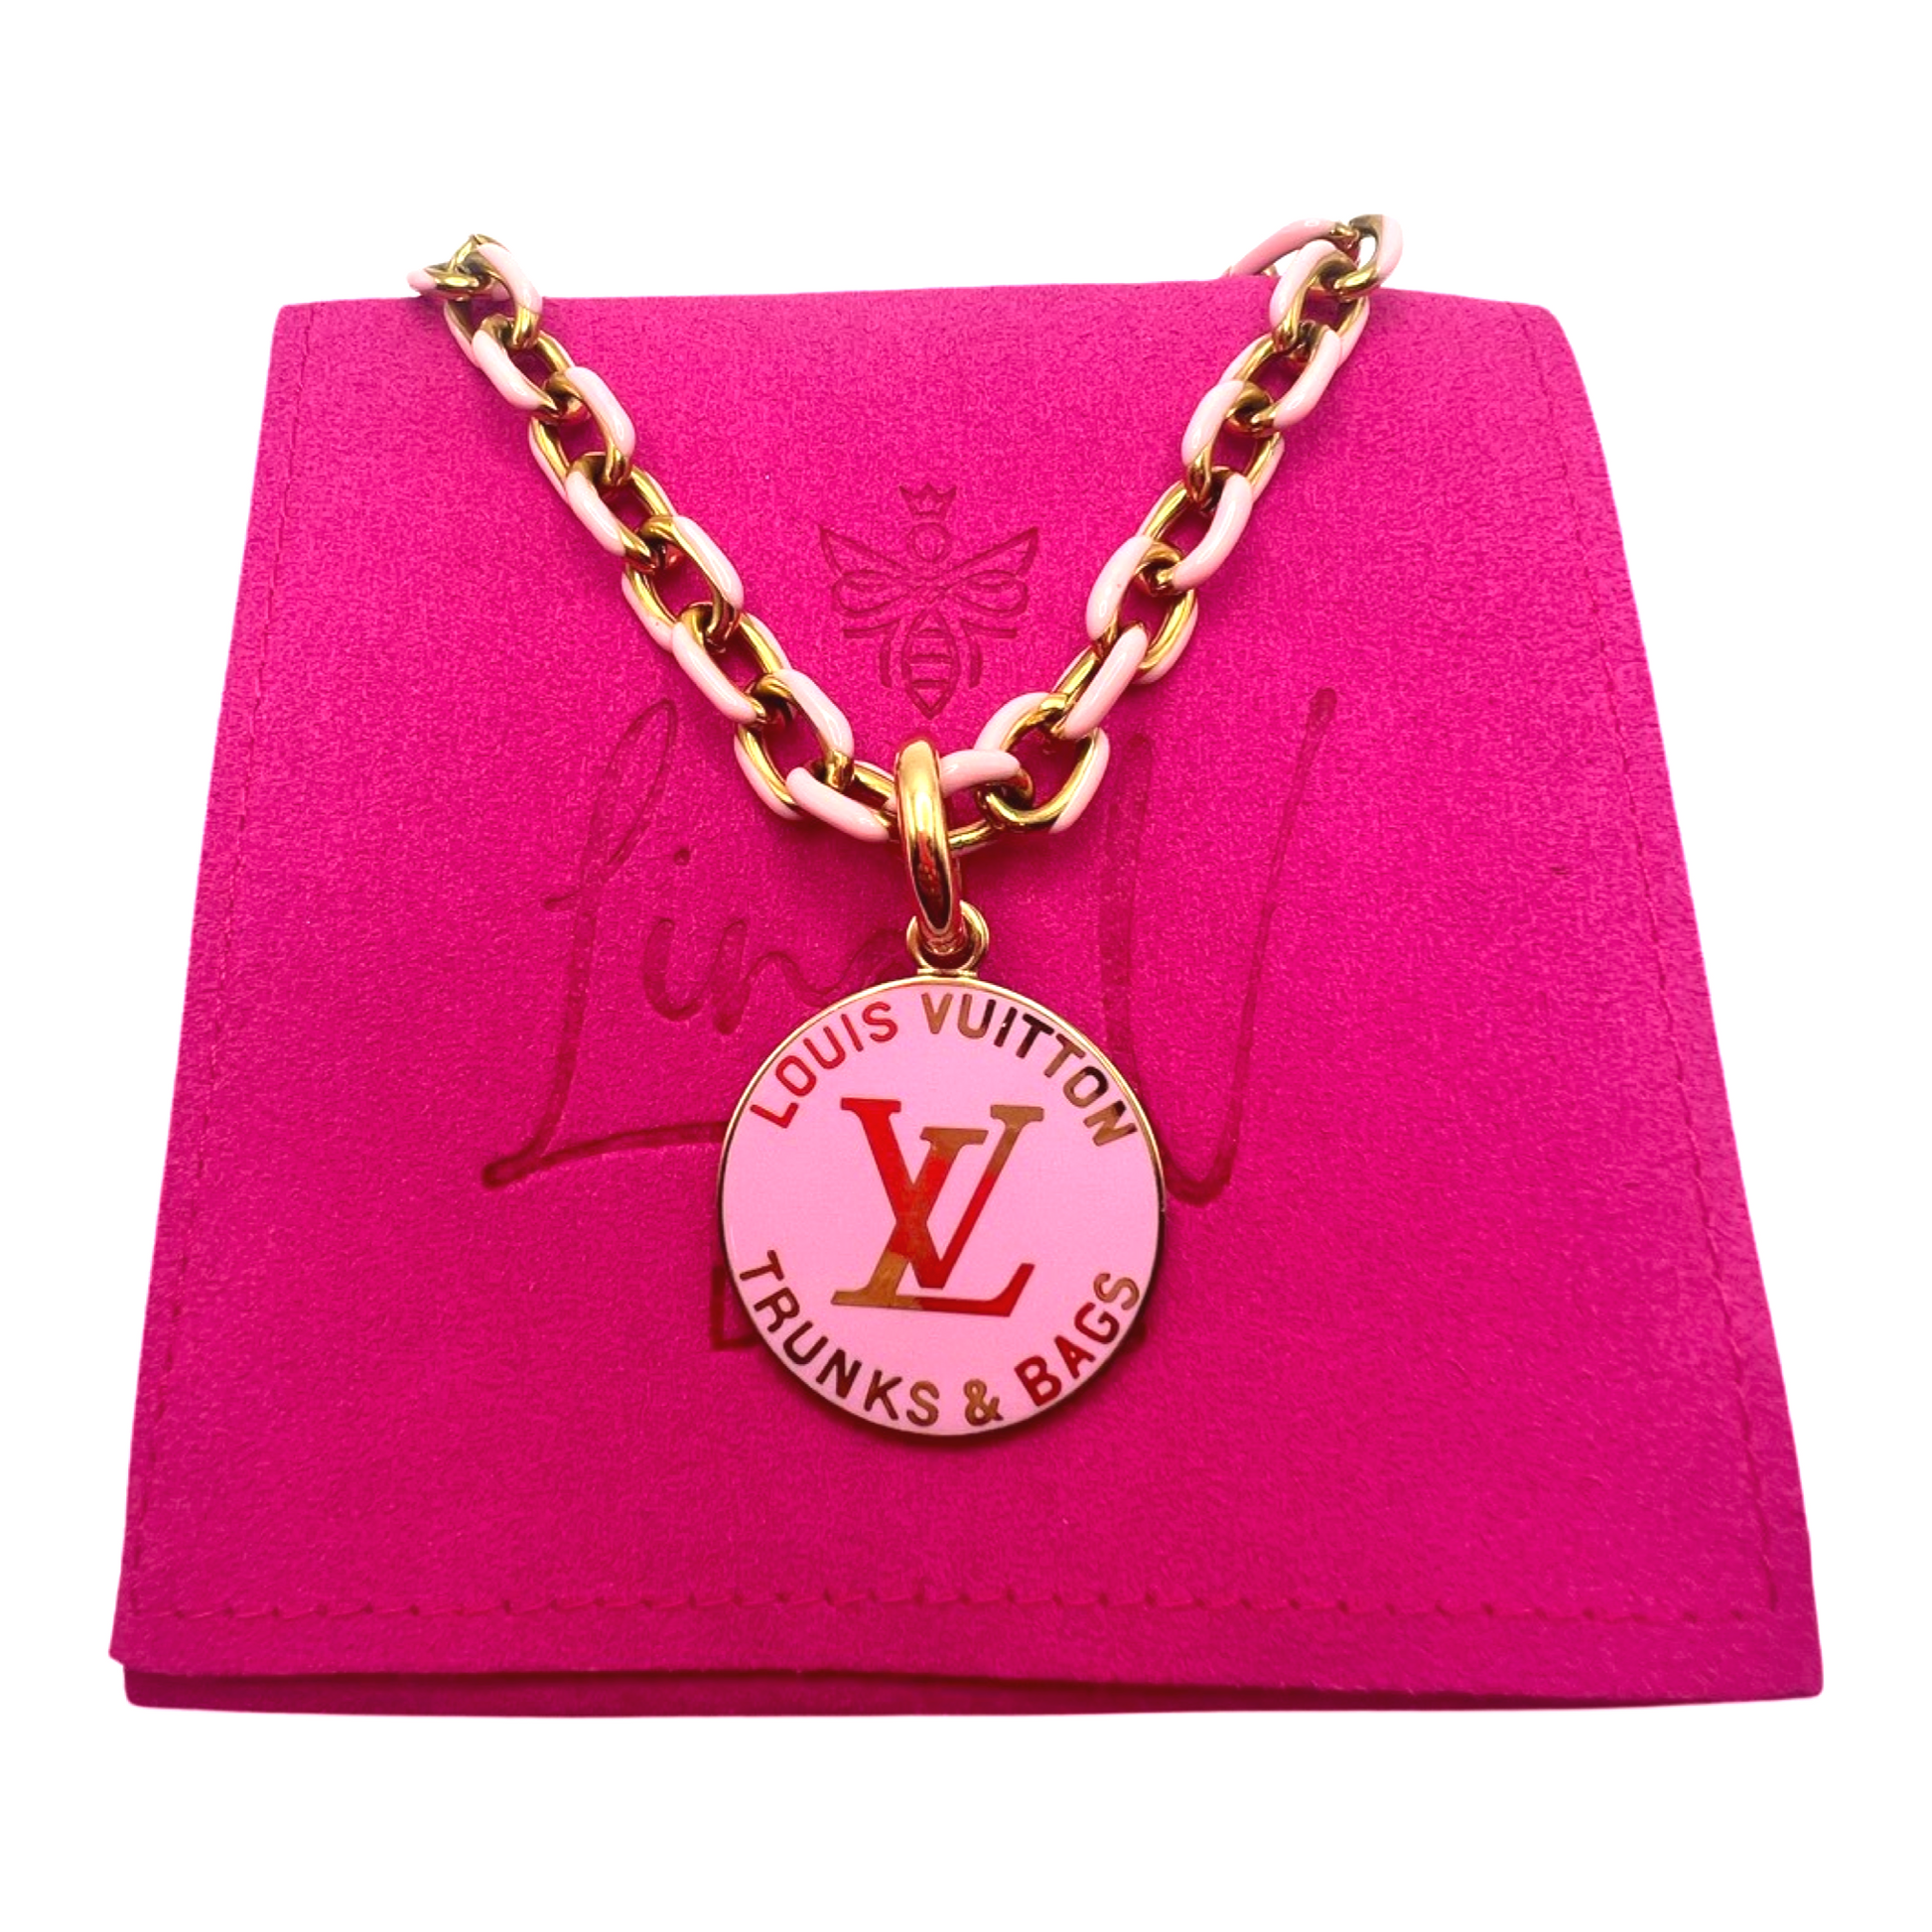 Repurposed LV Trunks & Bags Pink Double Sided Necklace – LINA V DESIGNS